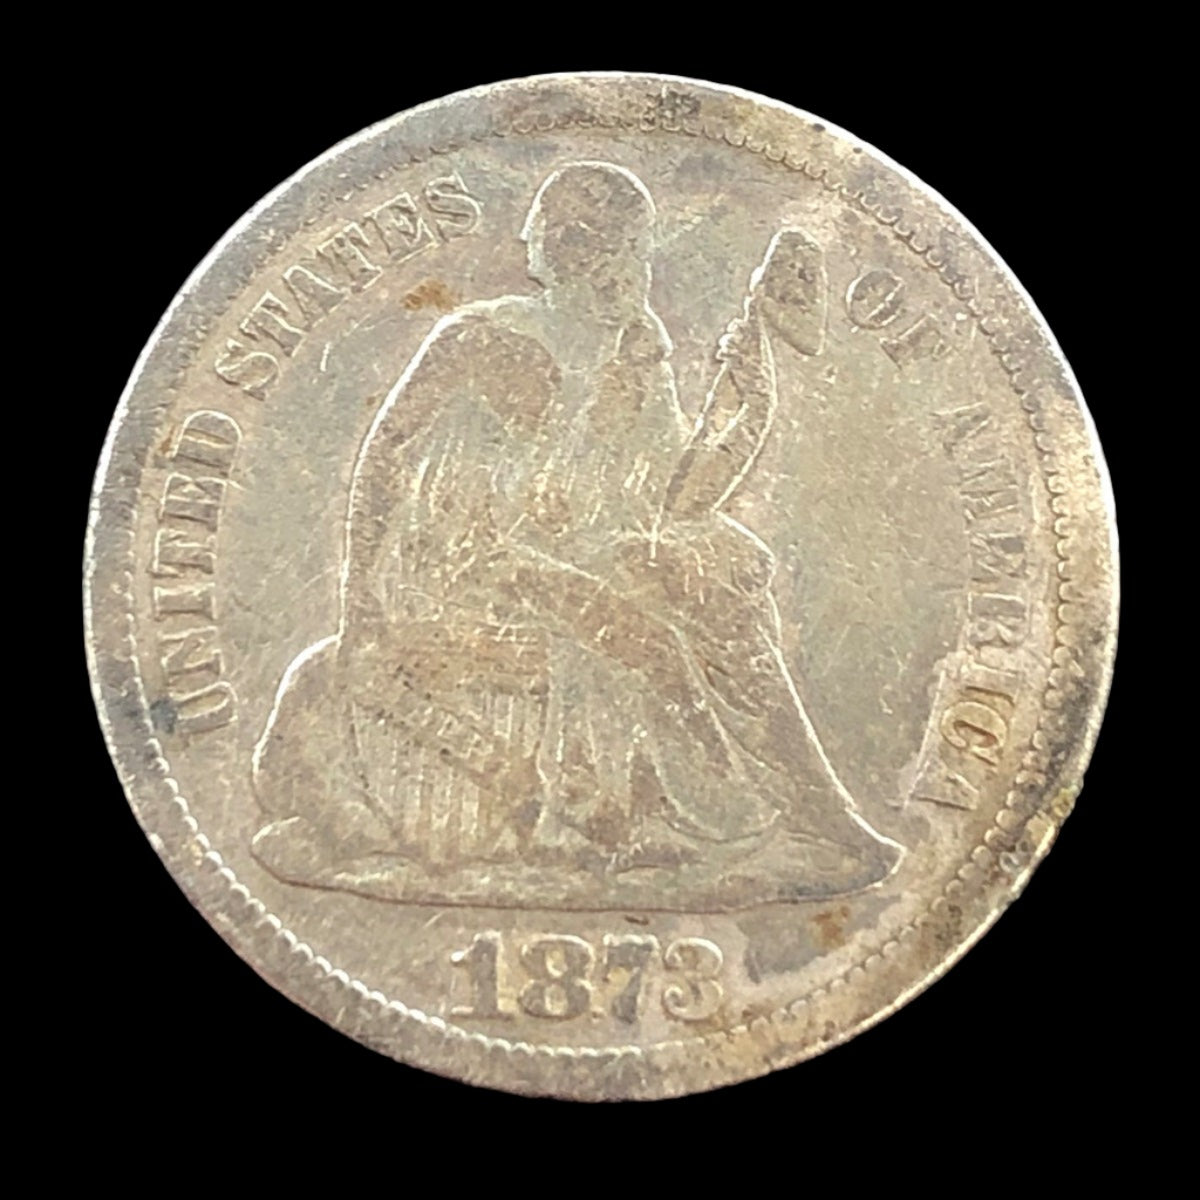 1873 Closed 3 Seated Liberty Dime (VG Details)